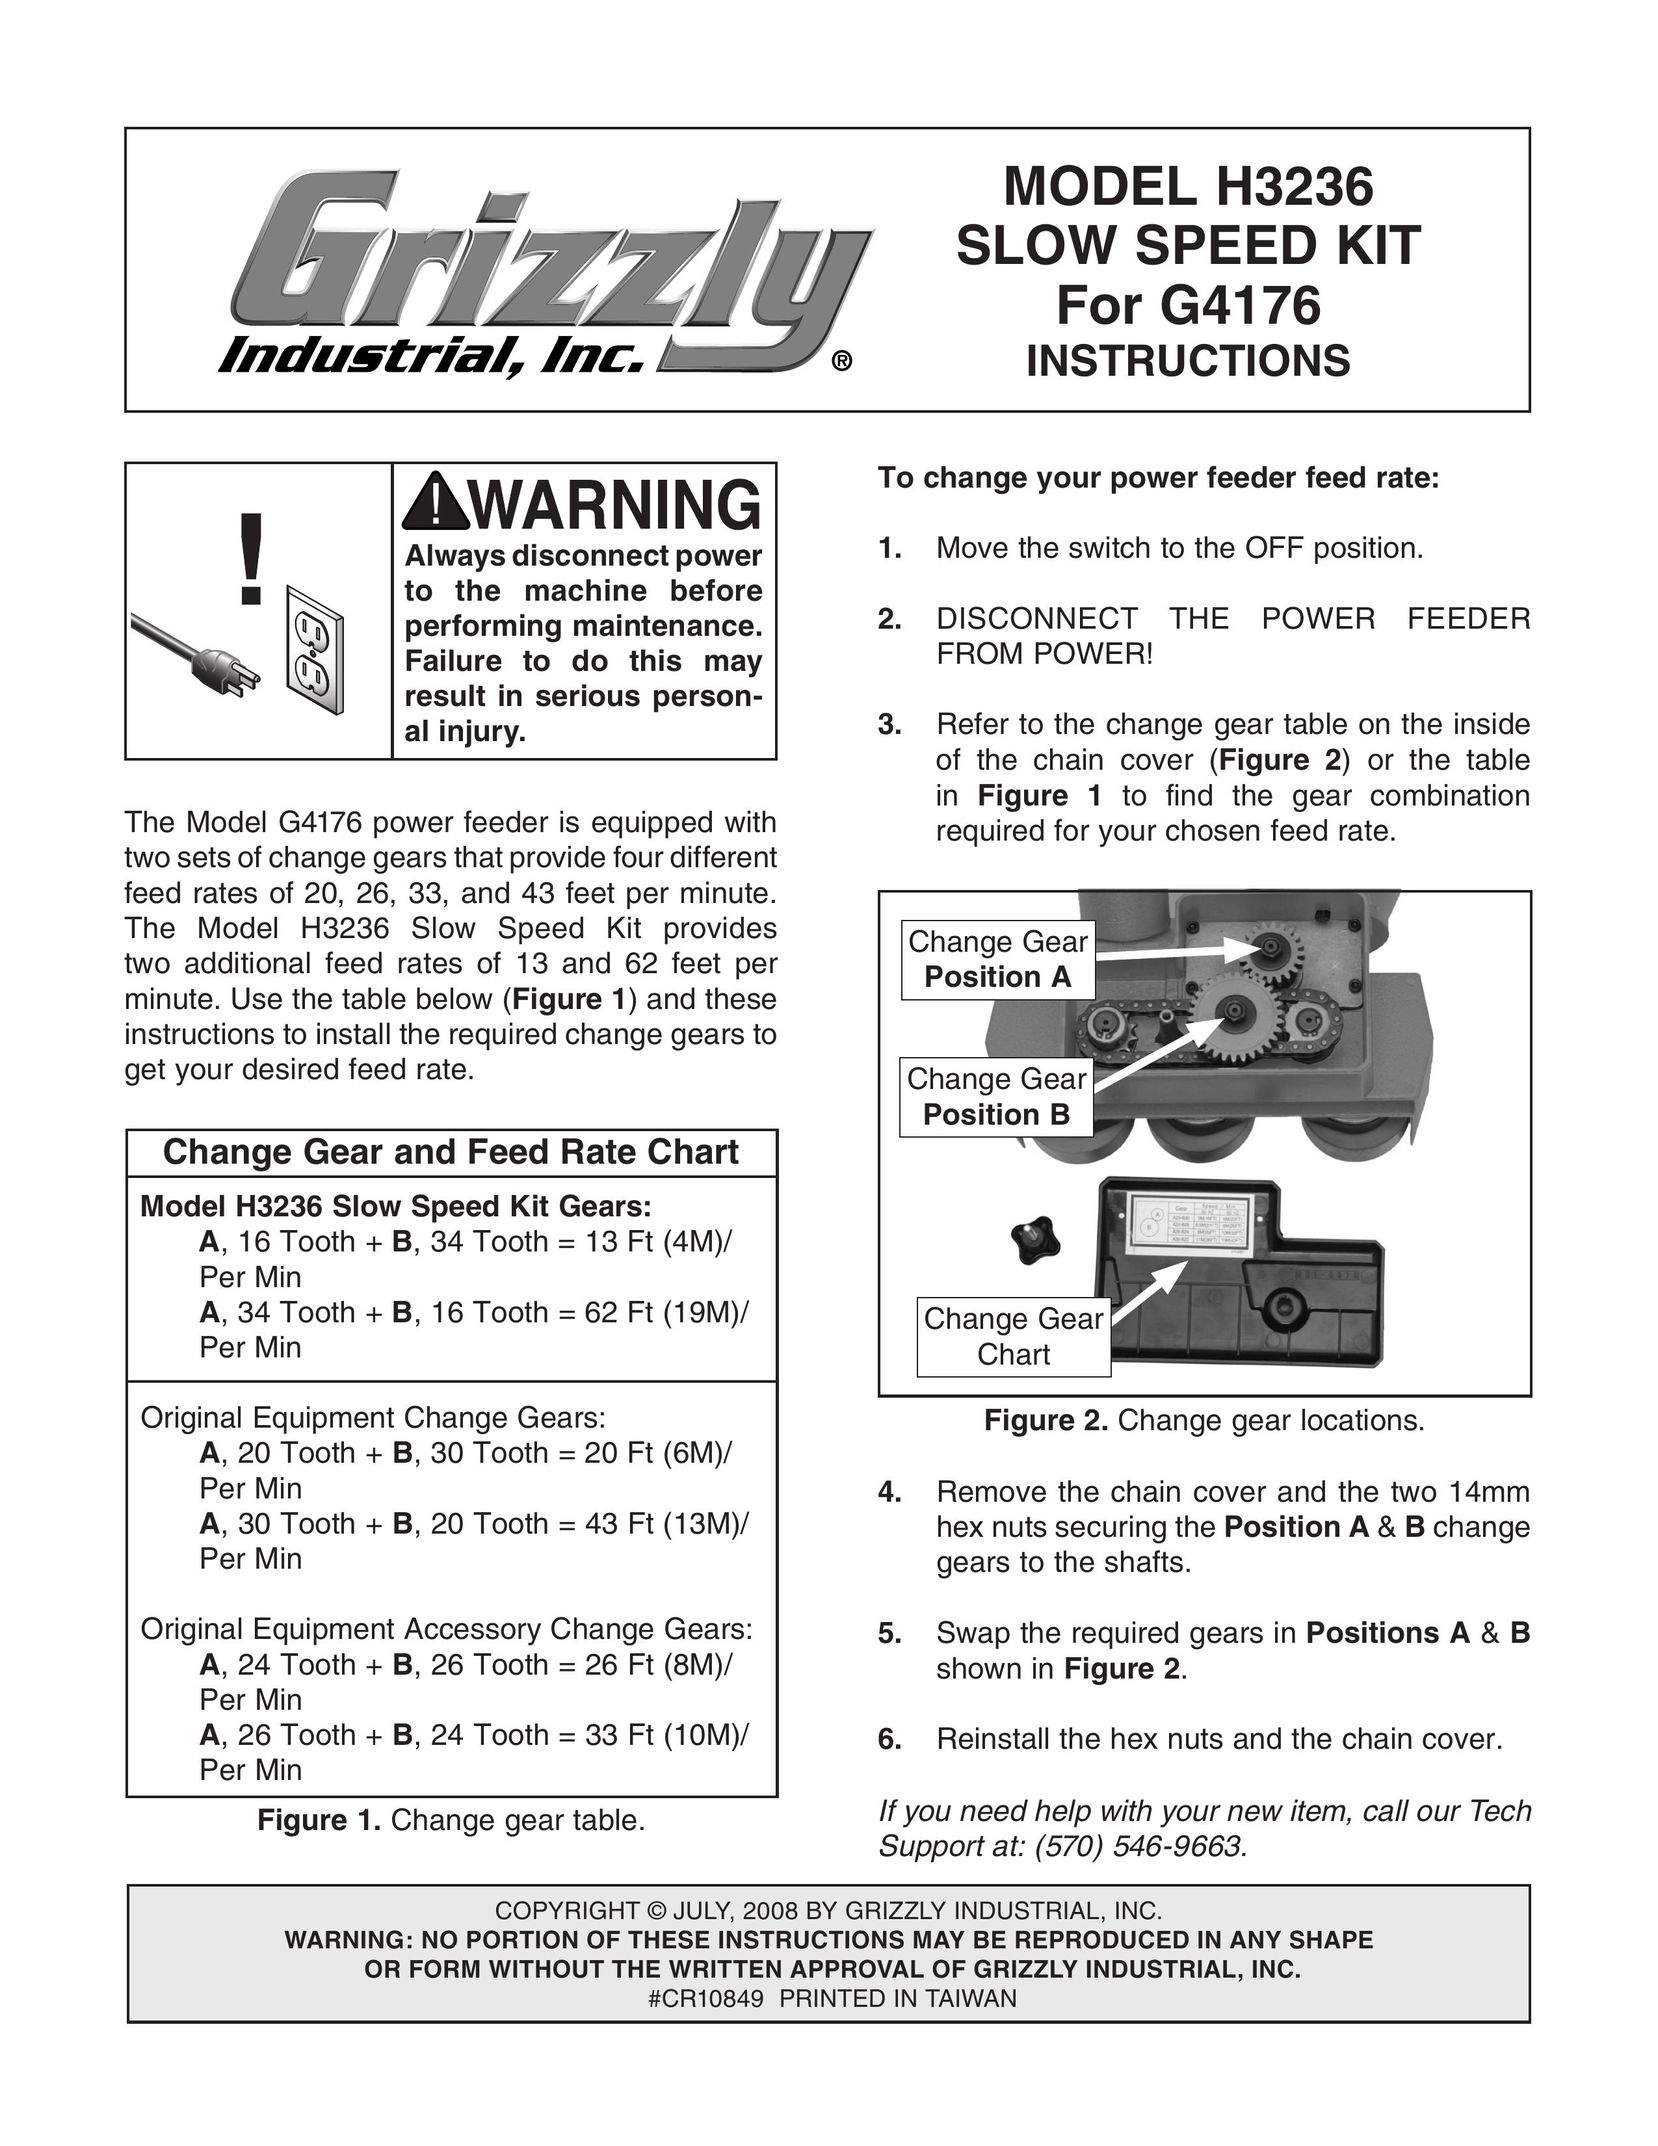 Grizzly H3236 Welder User Manual